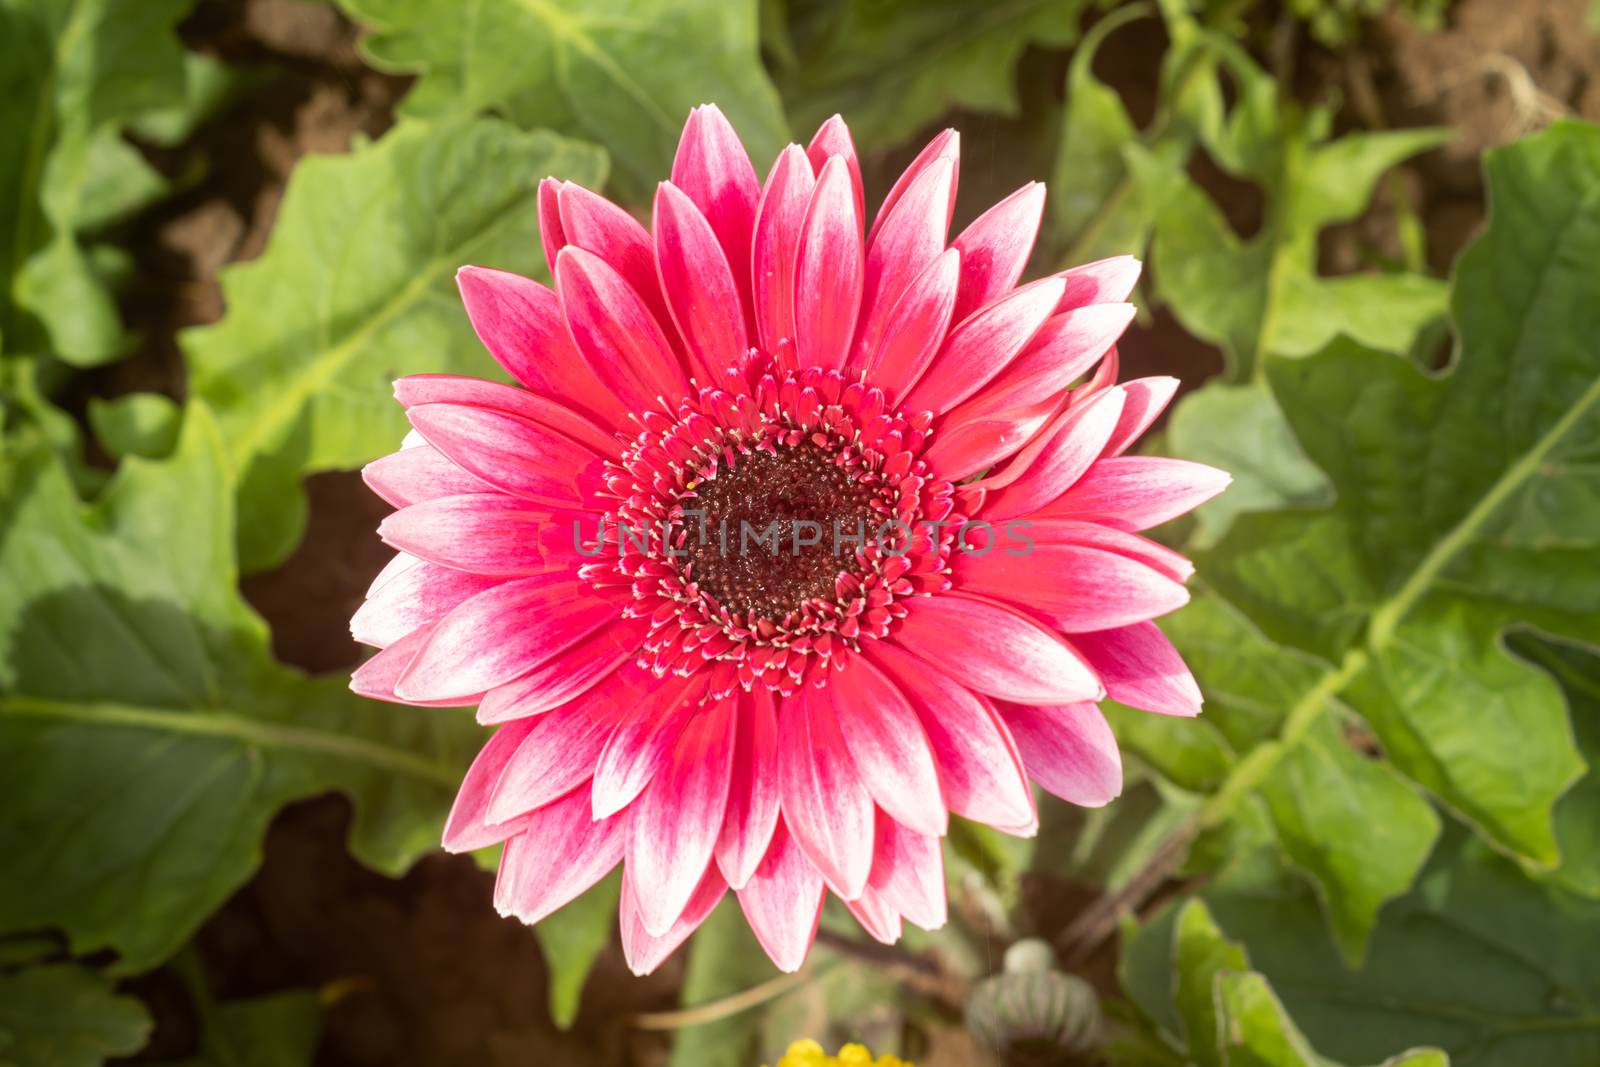 Red Gerbera Daisy or Gerbera Flower on Green Leaves Background by steafpong